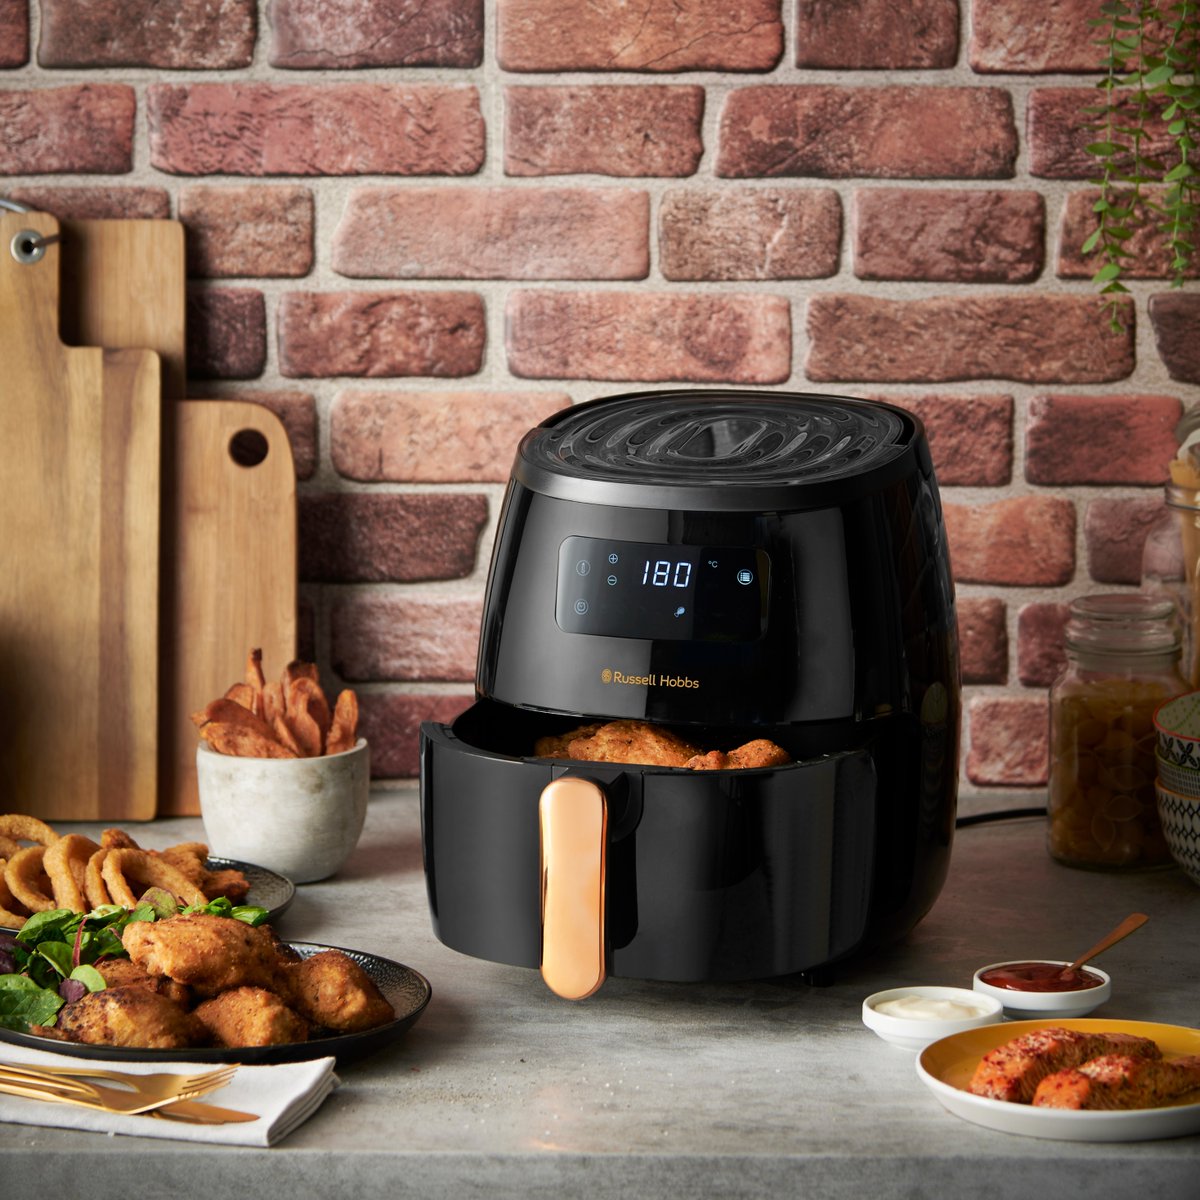 Calling all Foodies 📣 Introducing the Satisfry Air Fryer Large 👨‍🍳 Crisps, browns and bakes with little or no oil required. ⏰Up to 82% faster than conventional oven cooked food. ⚡Saves up to 48% energy compared to a conventional oven. Shop Now: bit.ly/3cNwZXl